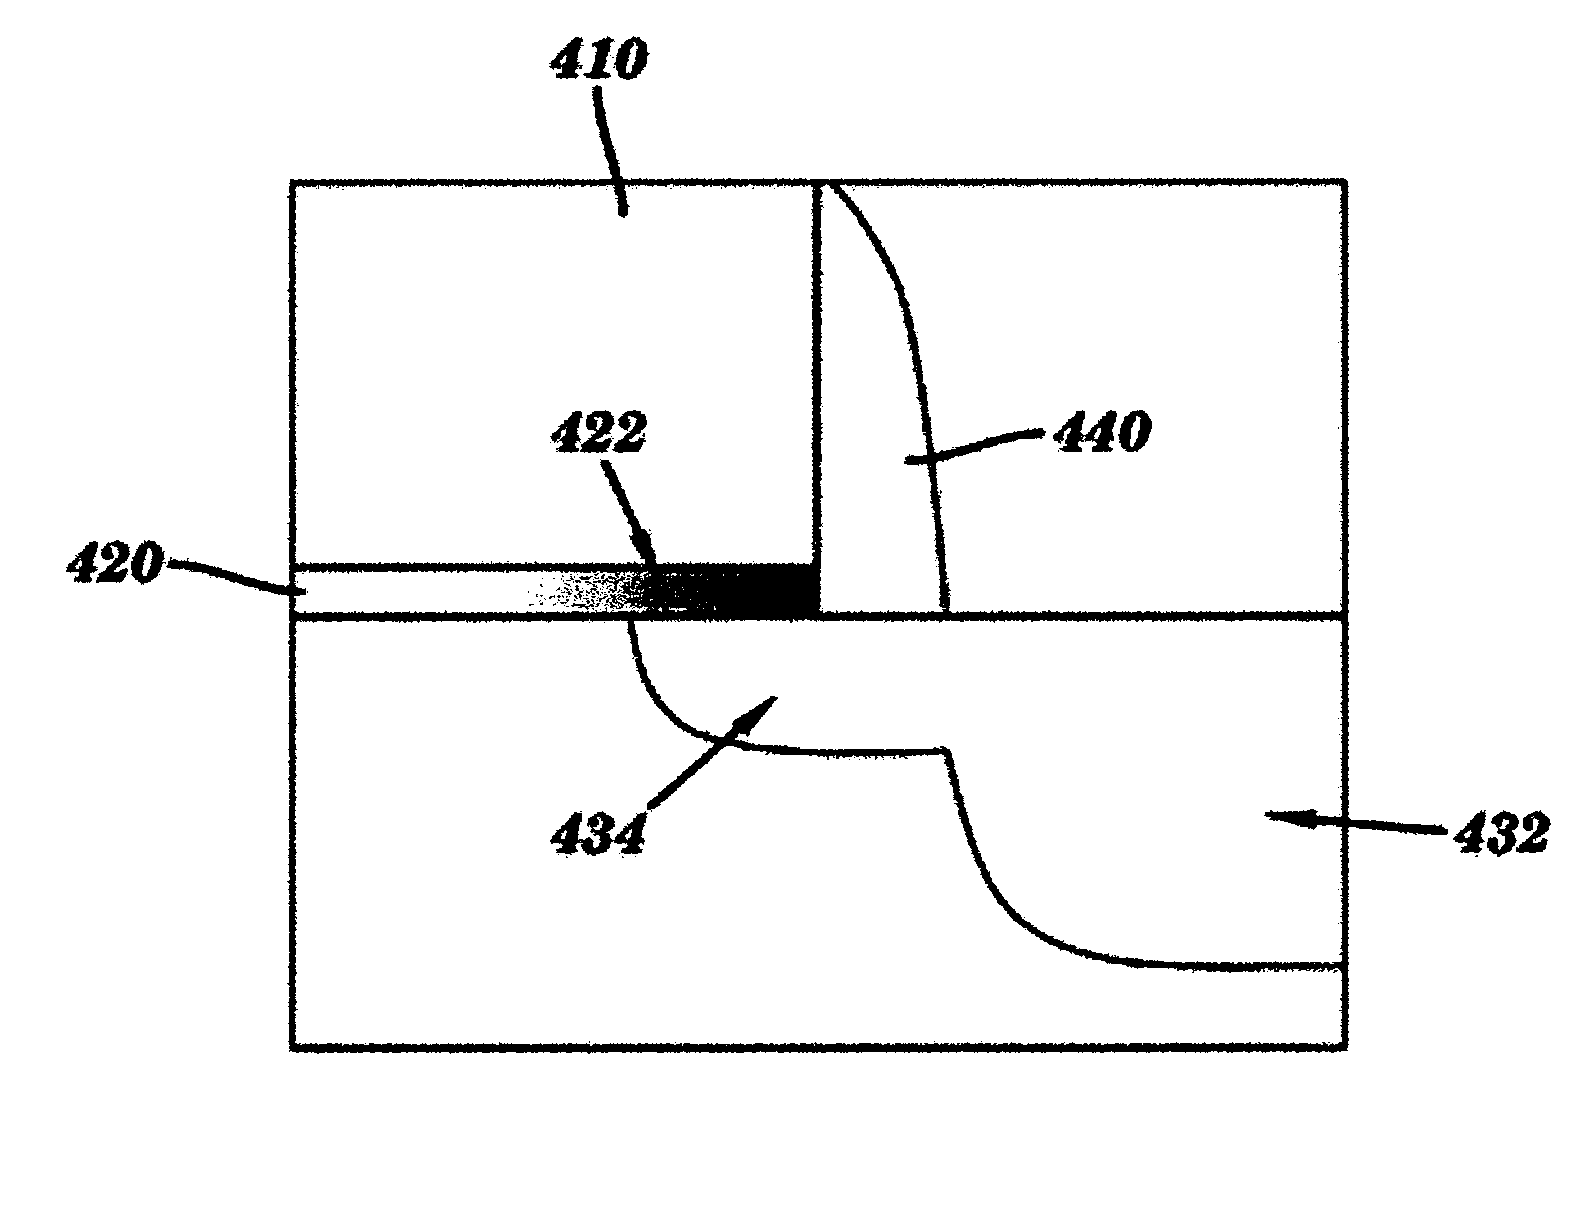 Method for forming semiconductor devices having reduced gate edge leakage current